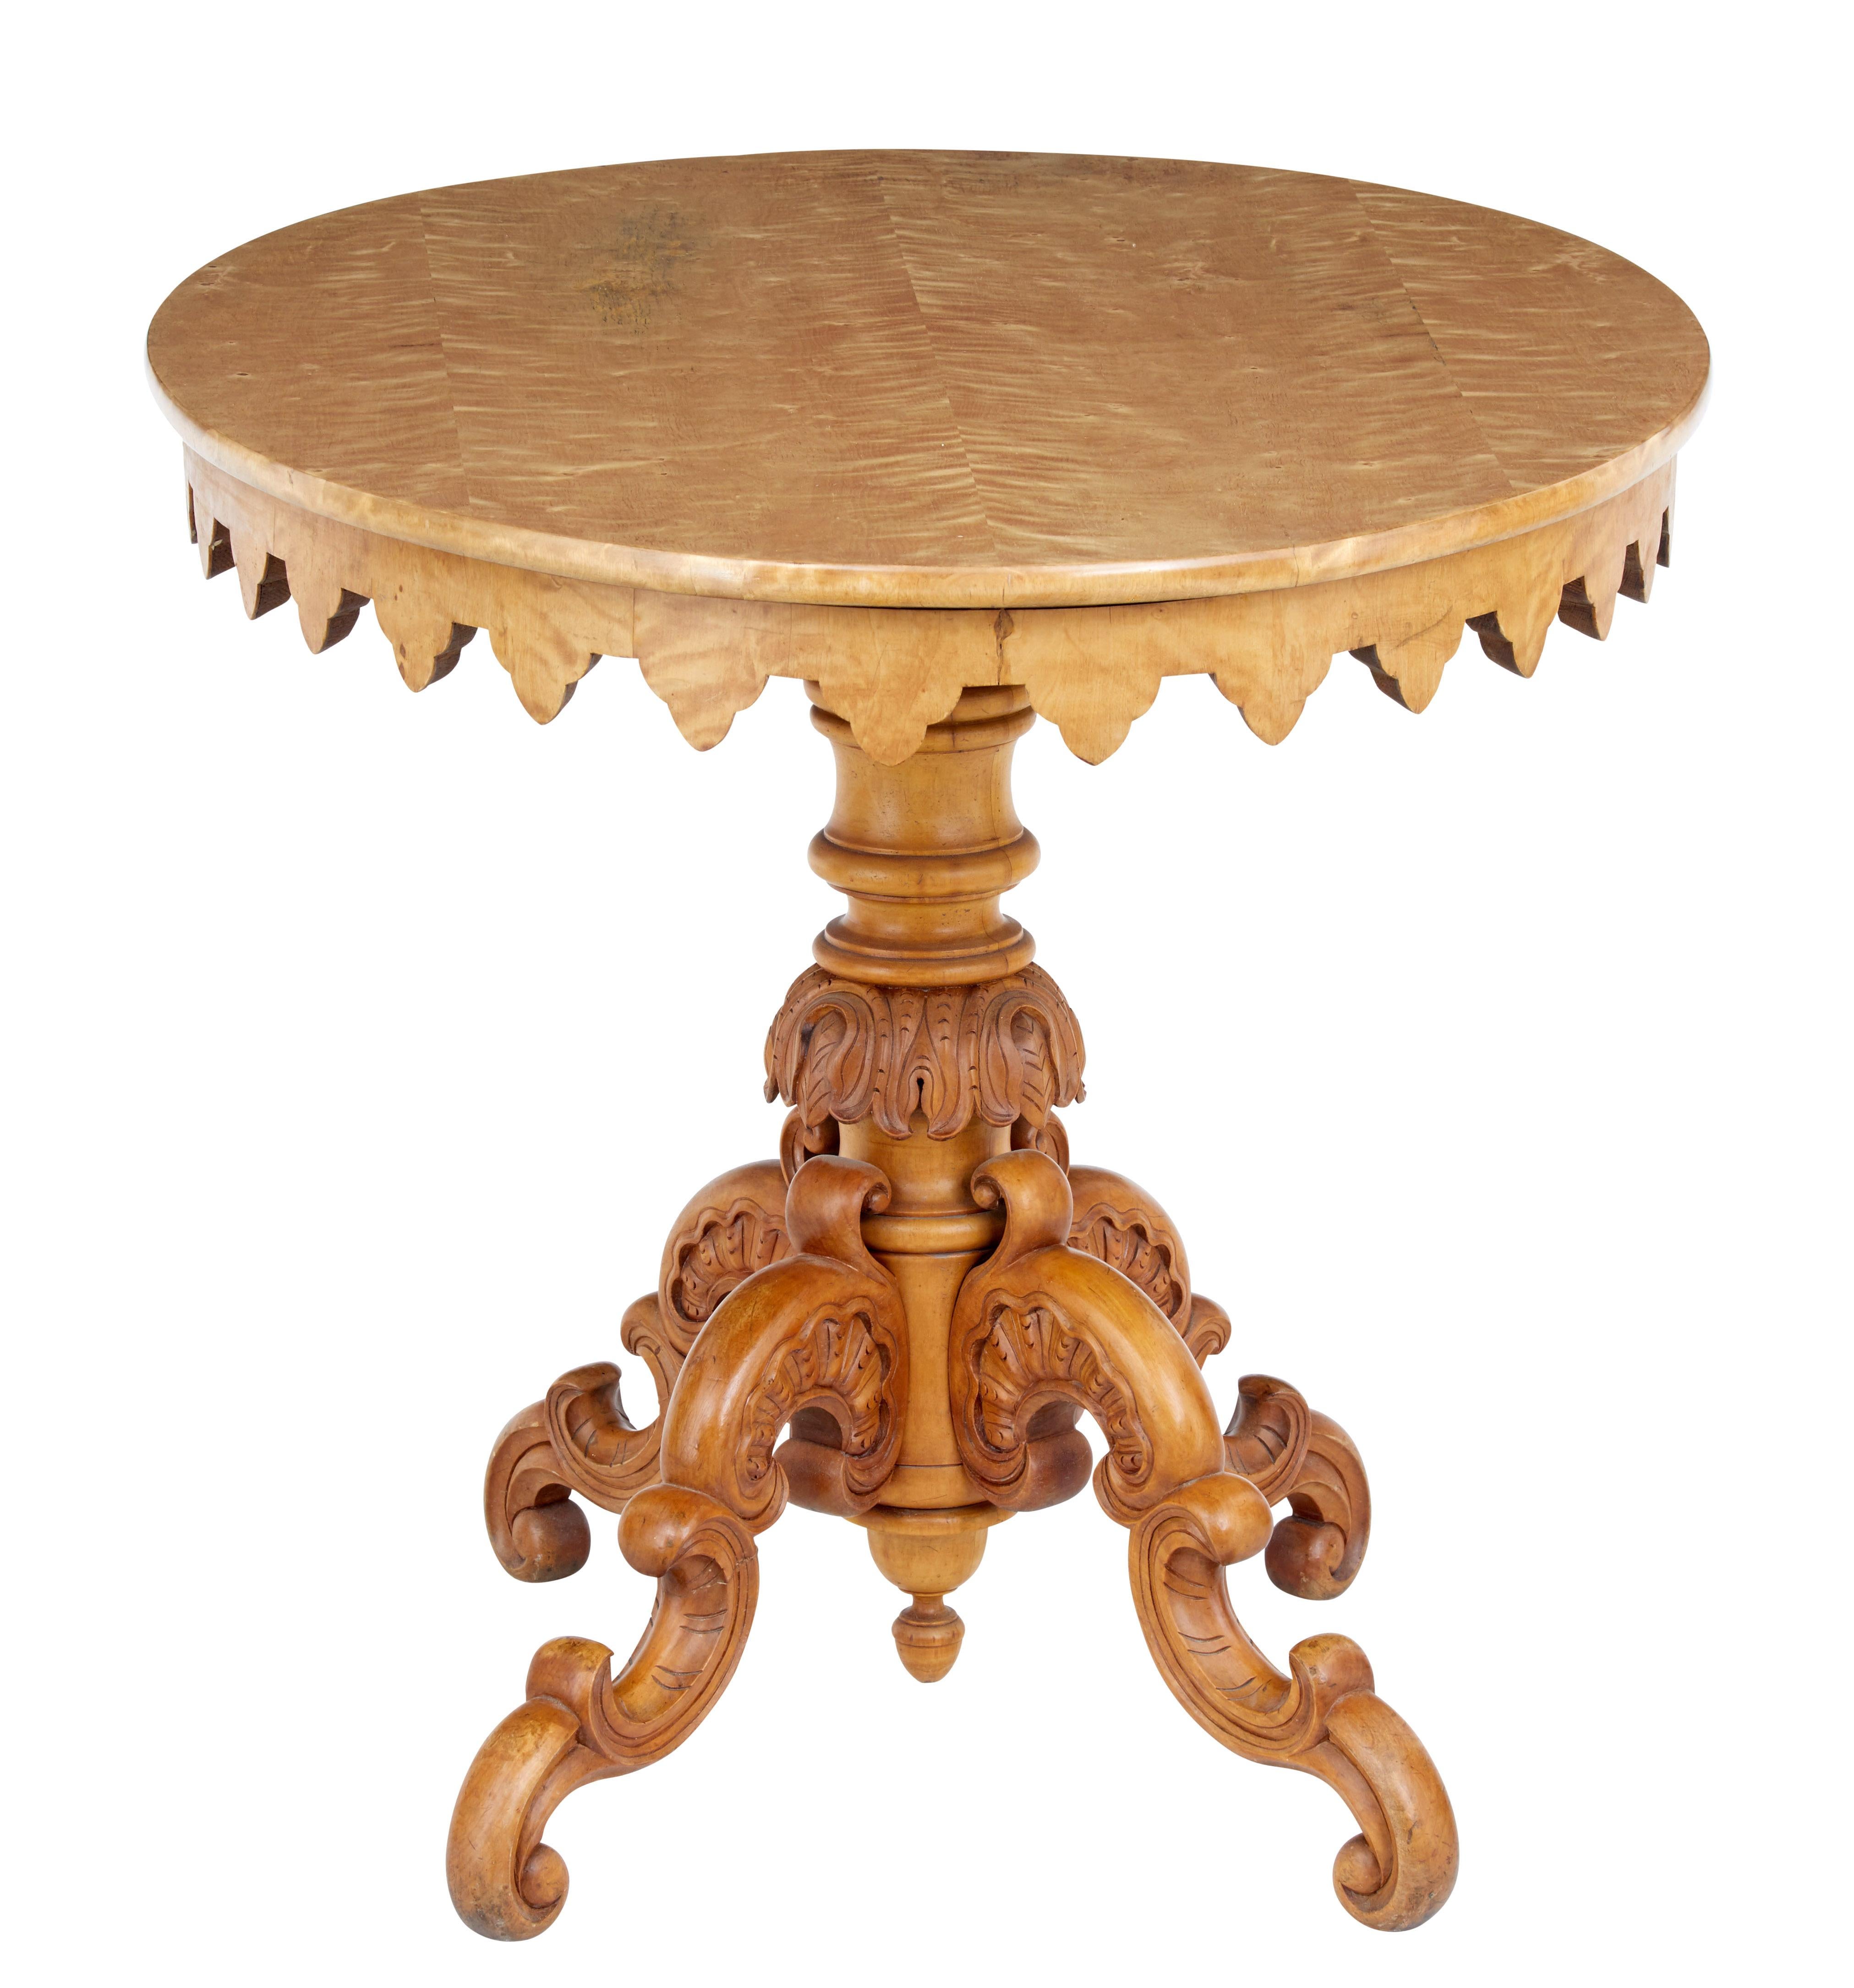 Swedish birch oval centre table, circa 1880.

Veneered oval top with shaped gothic style frieze below the top surface. Standing on a heavily carved and turned base and 4 scrolling legs.

Wear to veneer on top surface which has been polished